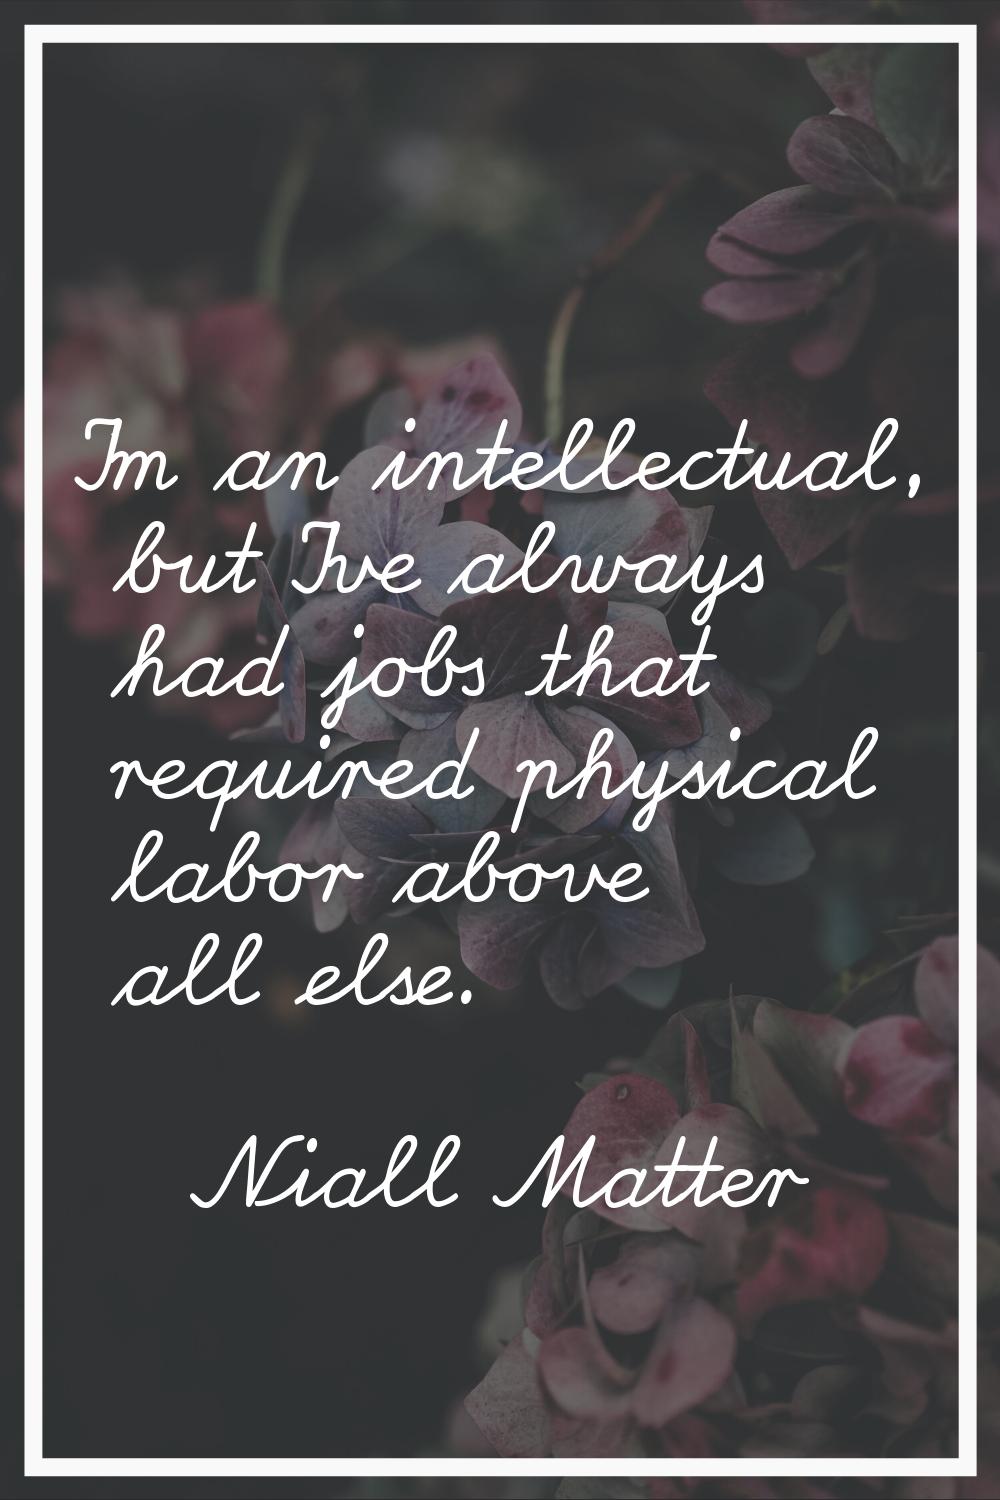 I'm an intellectual, but I've always had jobs that required physical labor above all else.